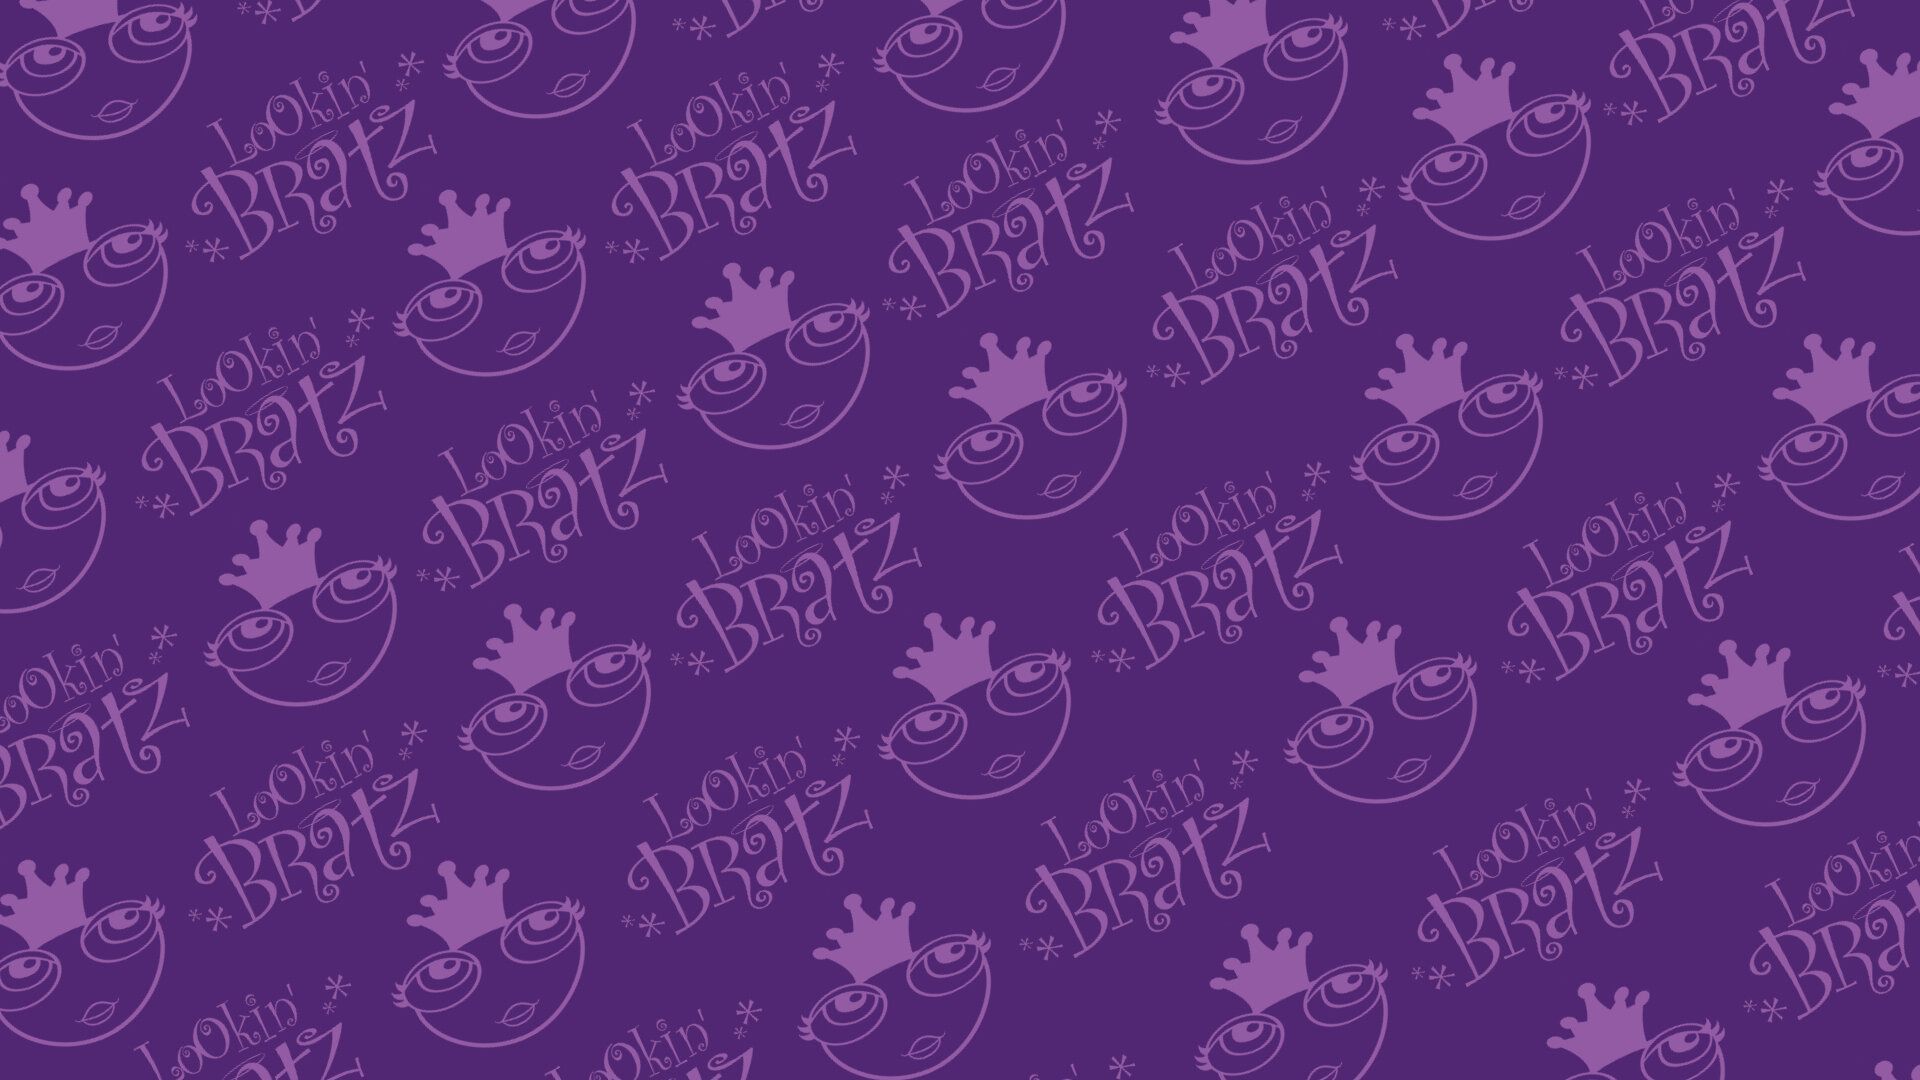 A purple background with many different drawings - Bratz